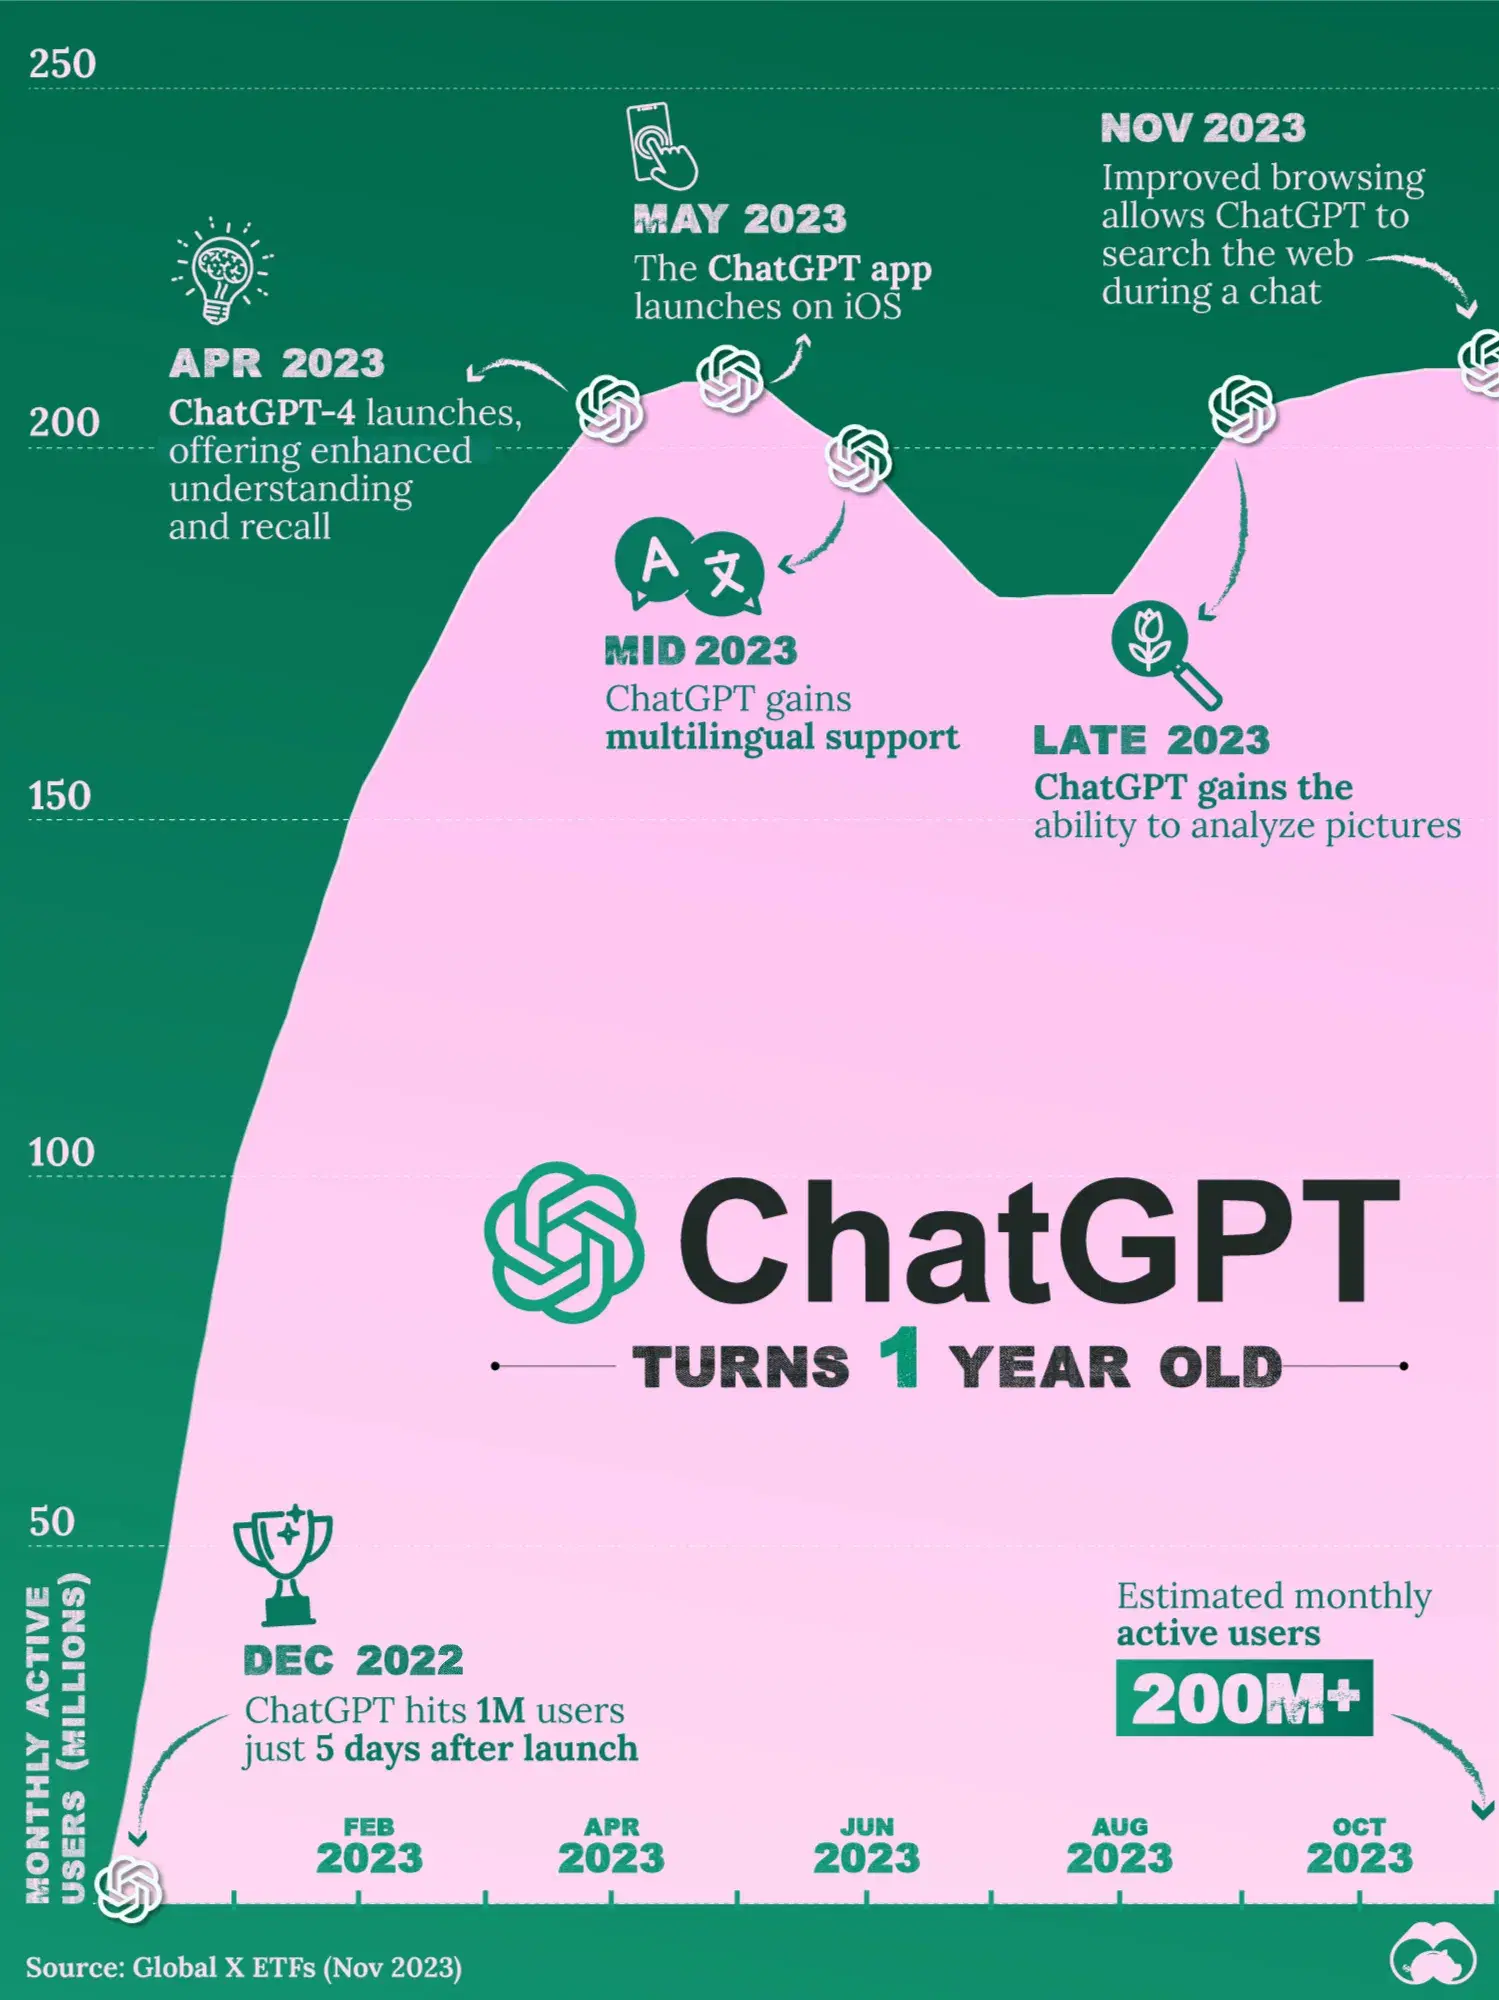 One Year After Launch, ChatGPT Has 200 Million Monthly Users